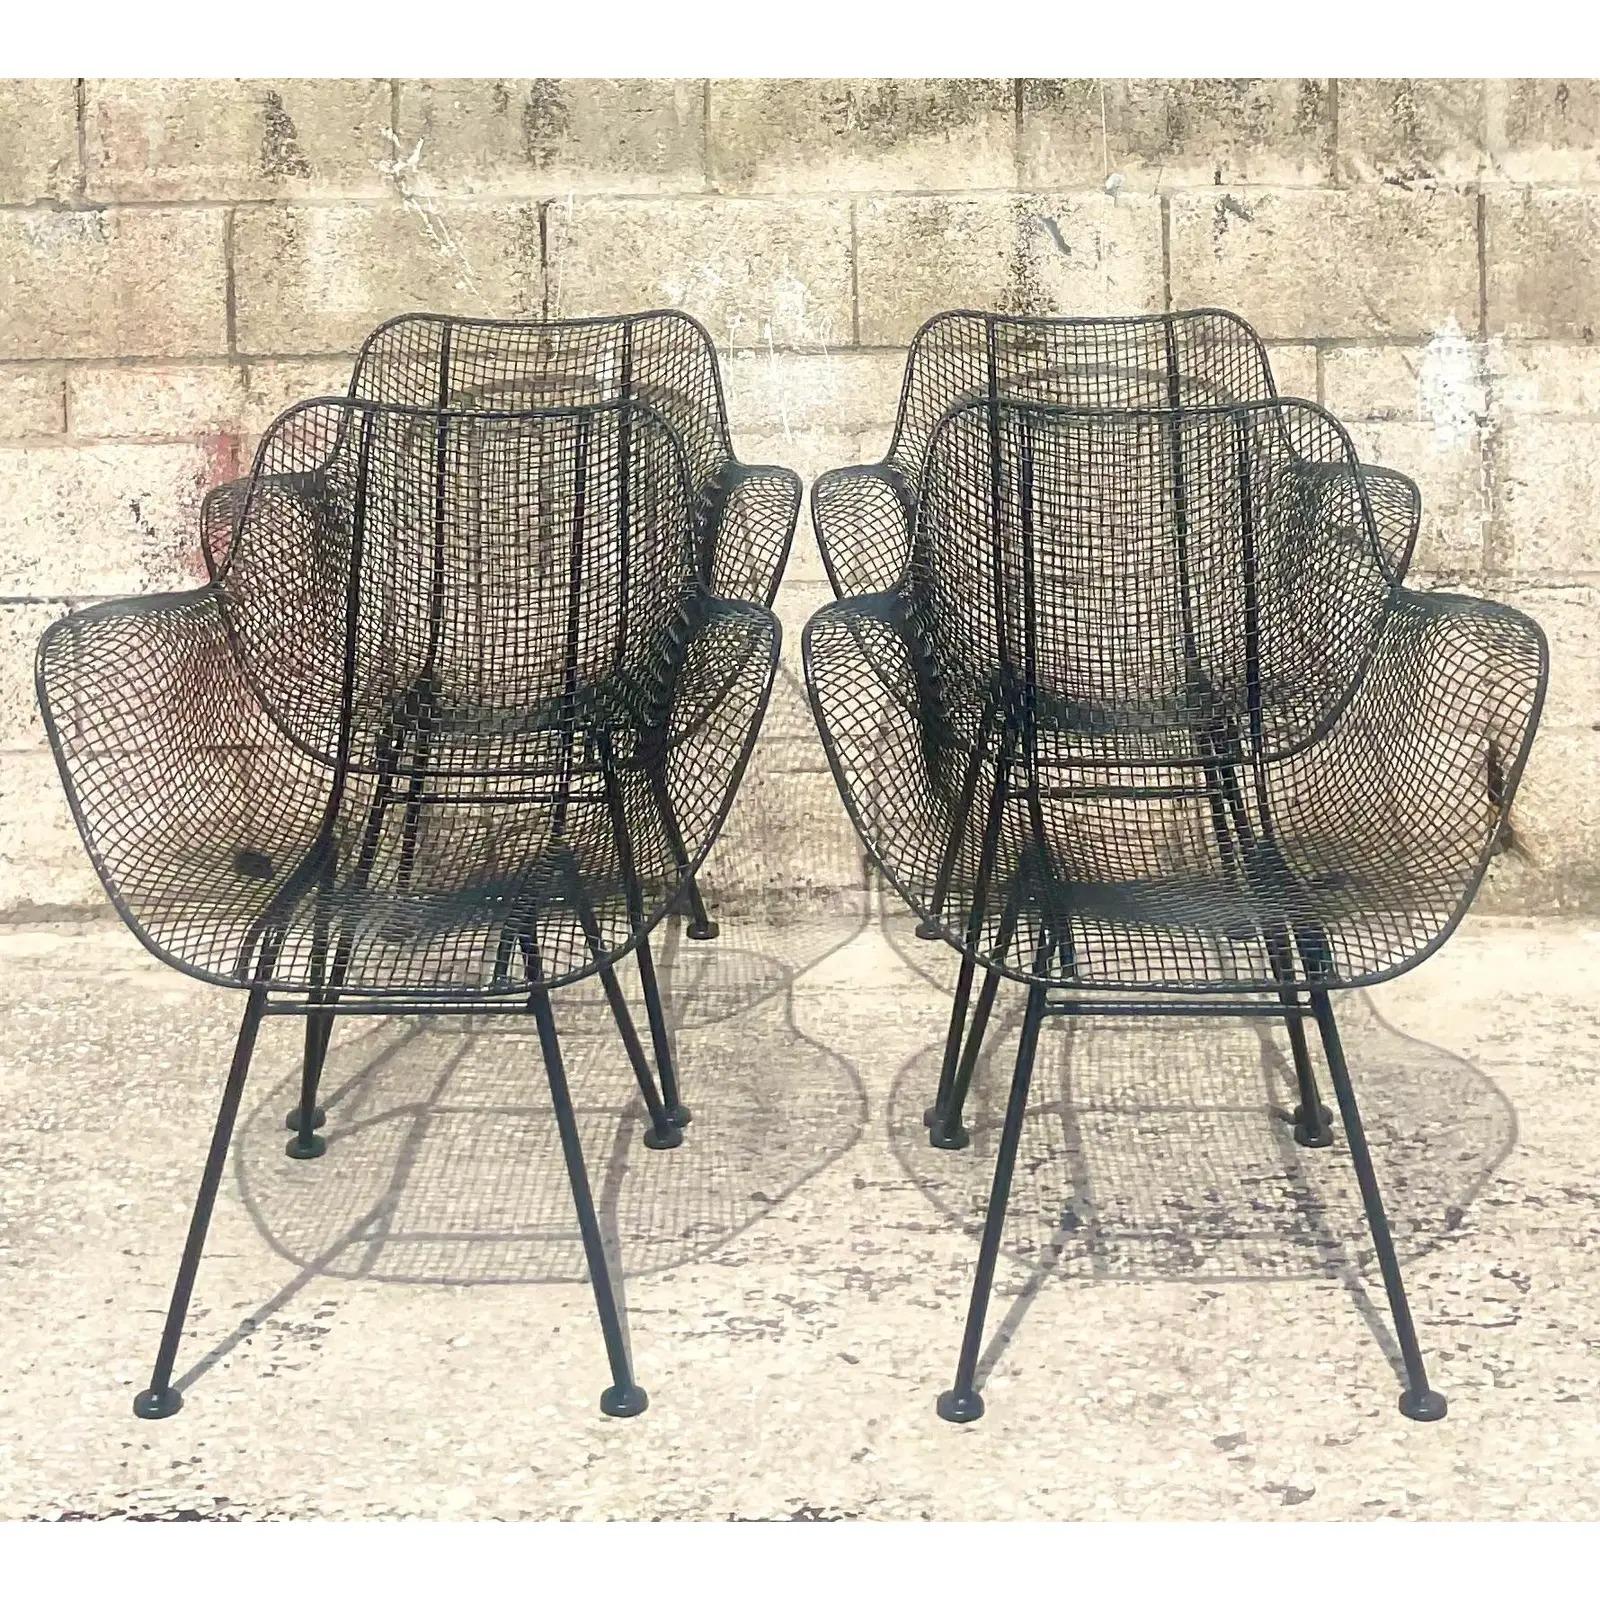 Fantastic set of four vintage MCM dining chairs. Made by the iconic Russell Woodard. A set of the highly coveted Sculptura collection. Fully restored with all new powder coated finish in matte black. All feet in perfect shape. Acquired from a Palm